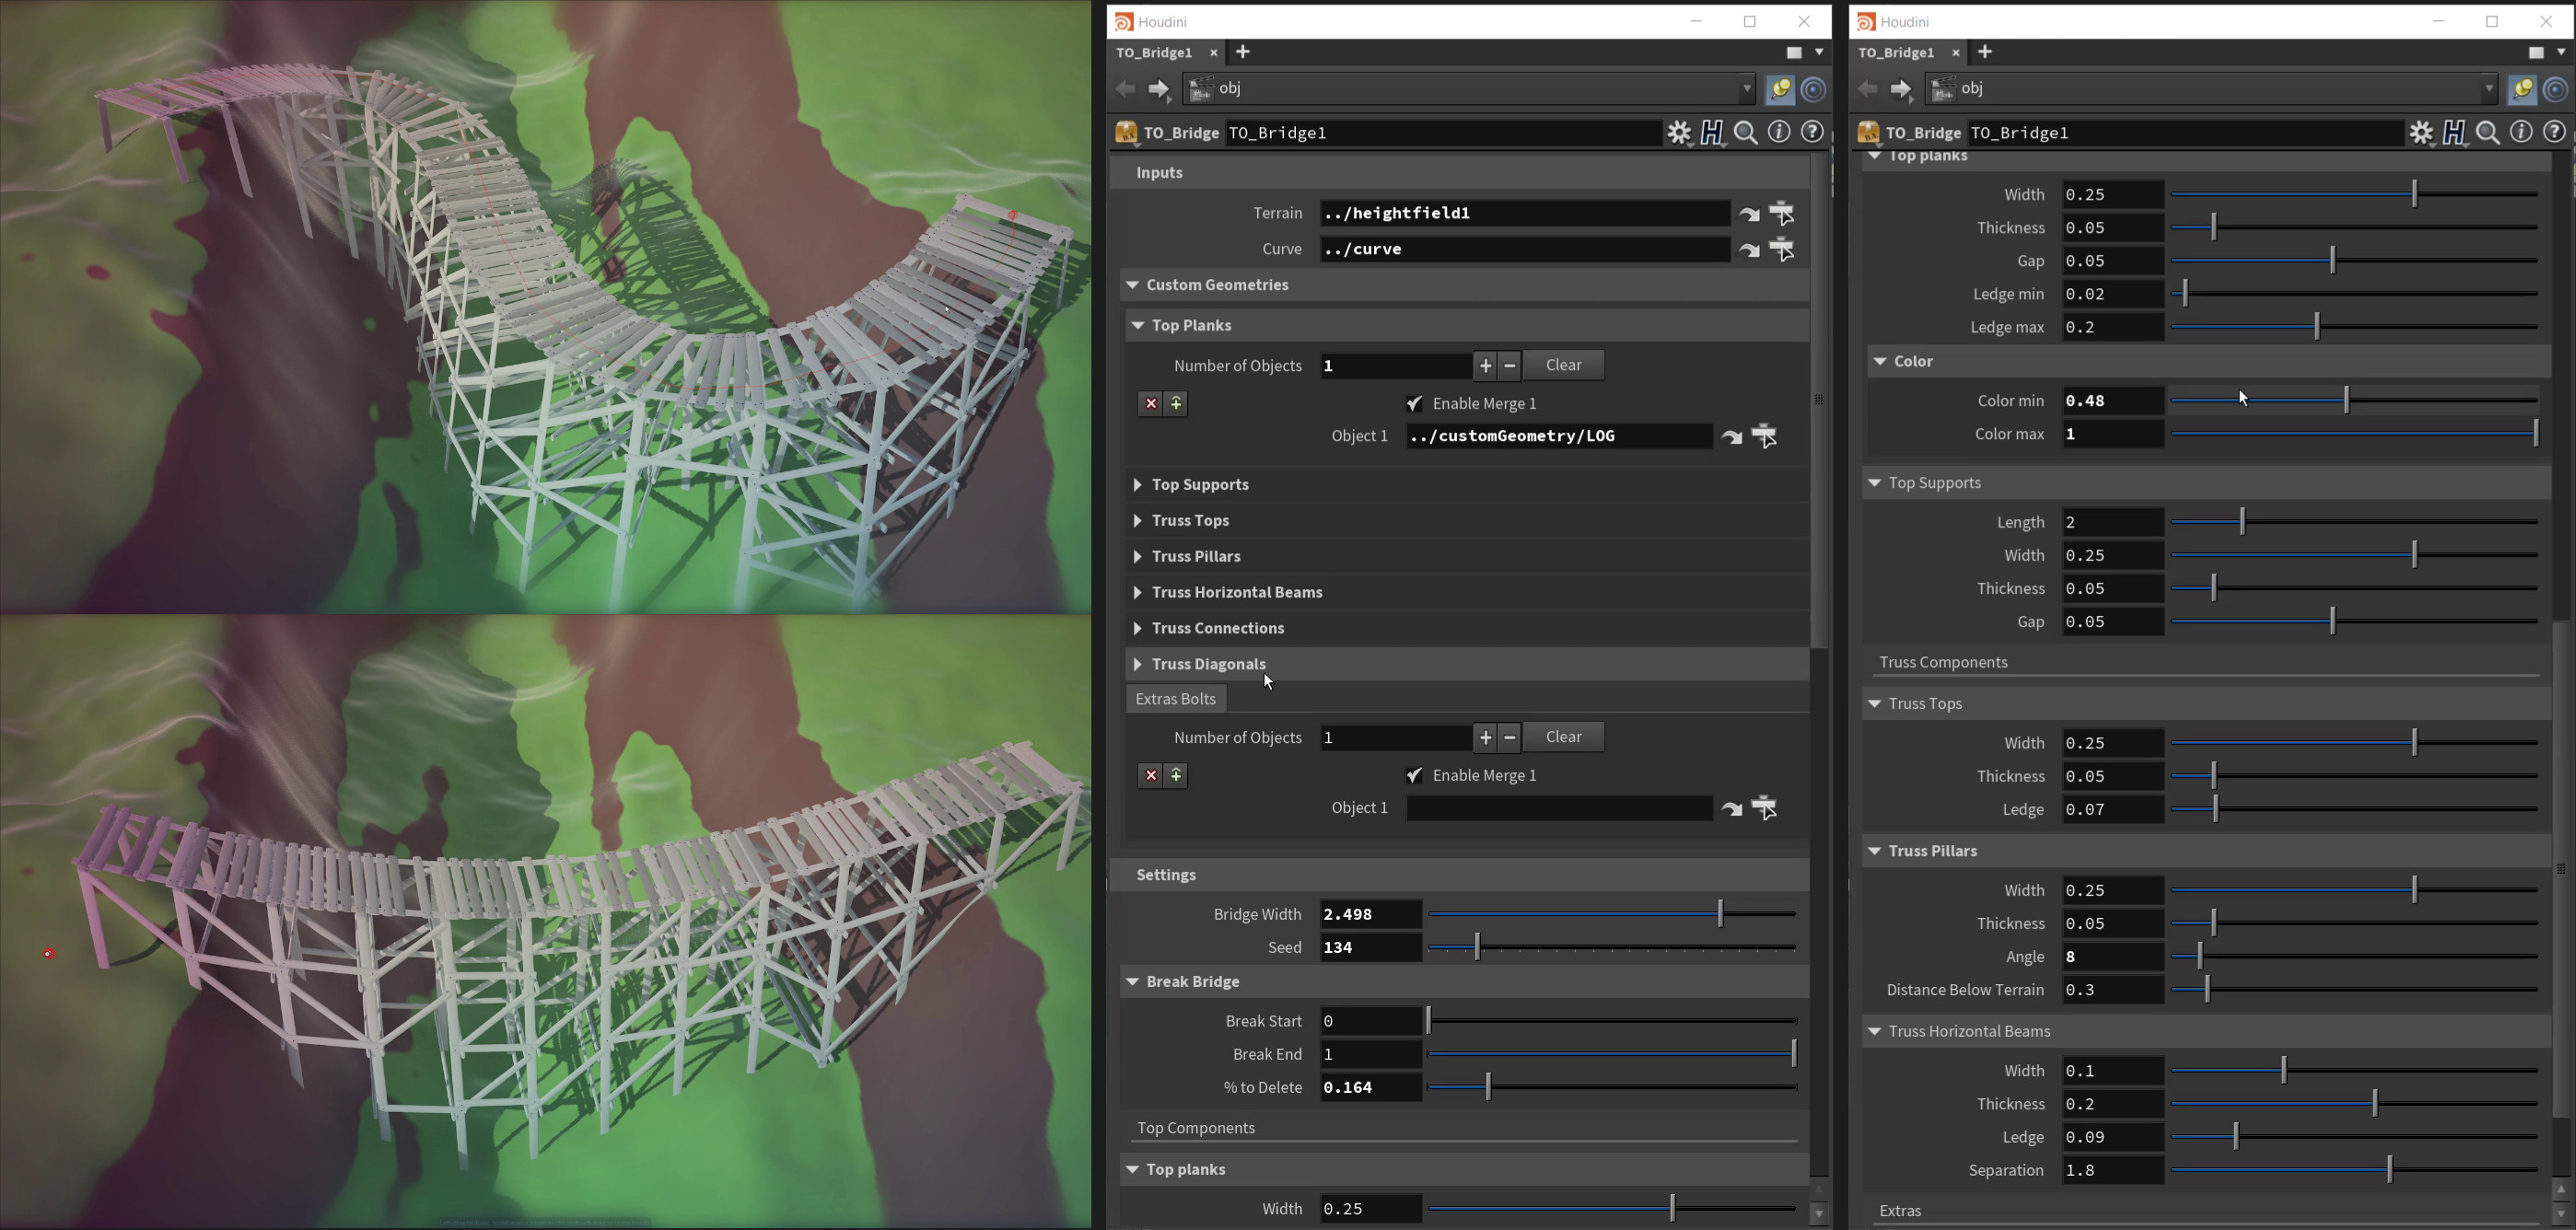 Screenshot showing UI for the Trestle Bridge HDA with an ability to affect different parts and use custom geometries